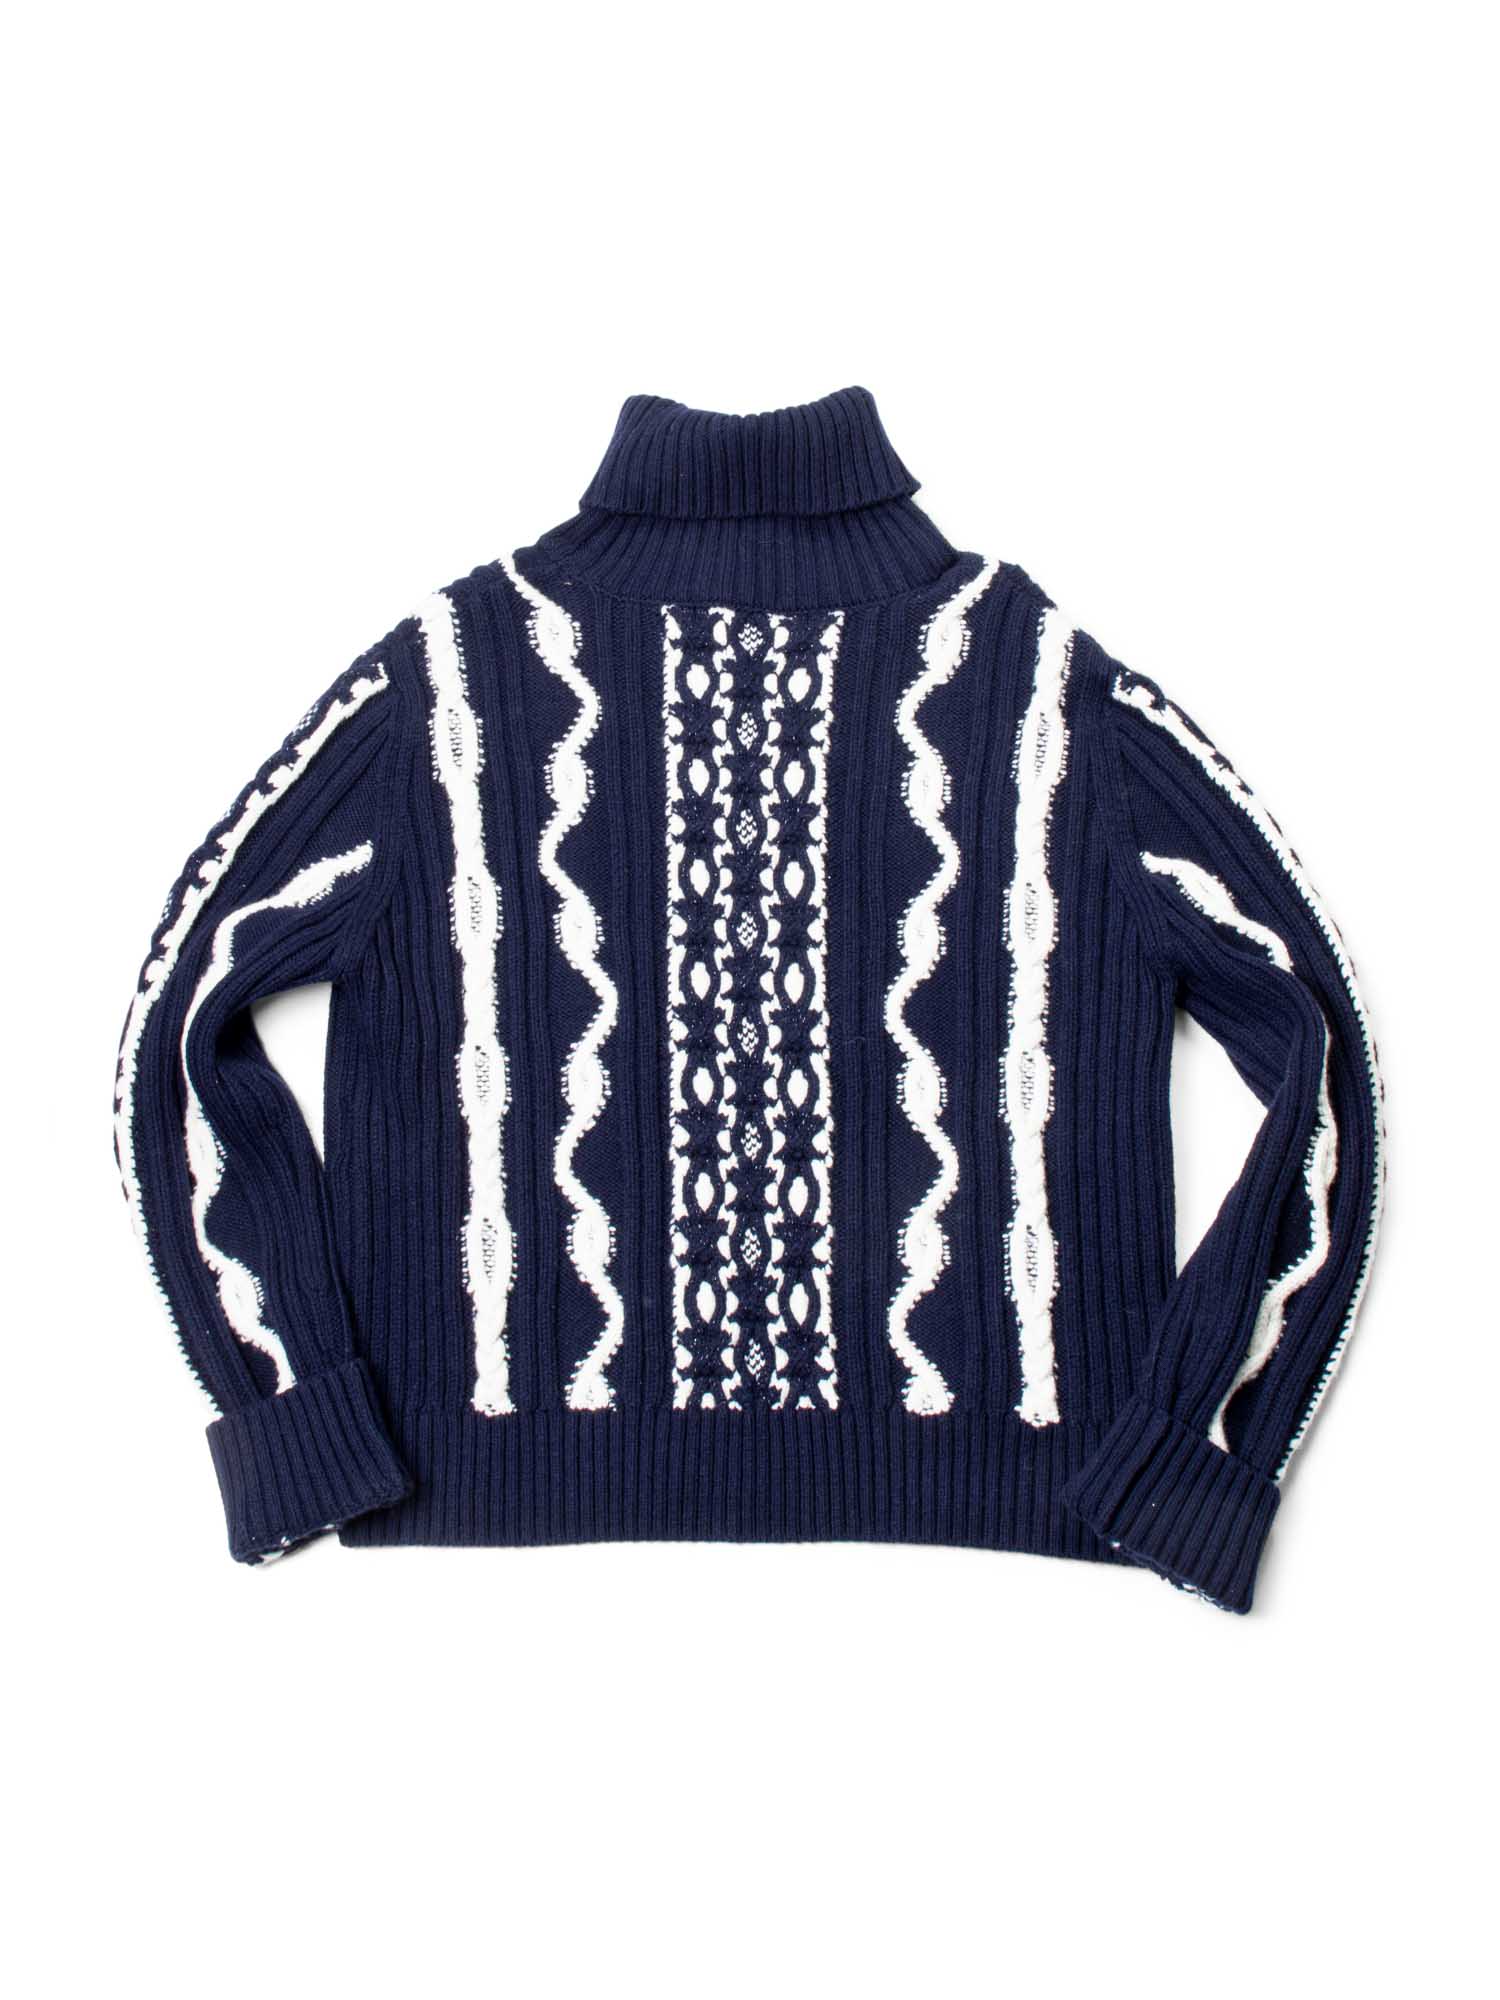 CHANEL Cable Knit Cashmere Sparkly Nautical Sweater Blue White